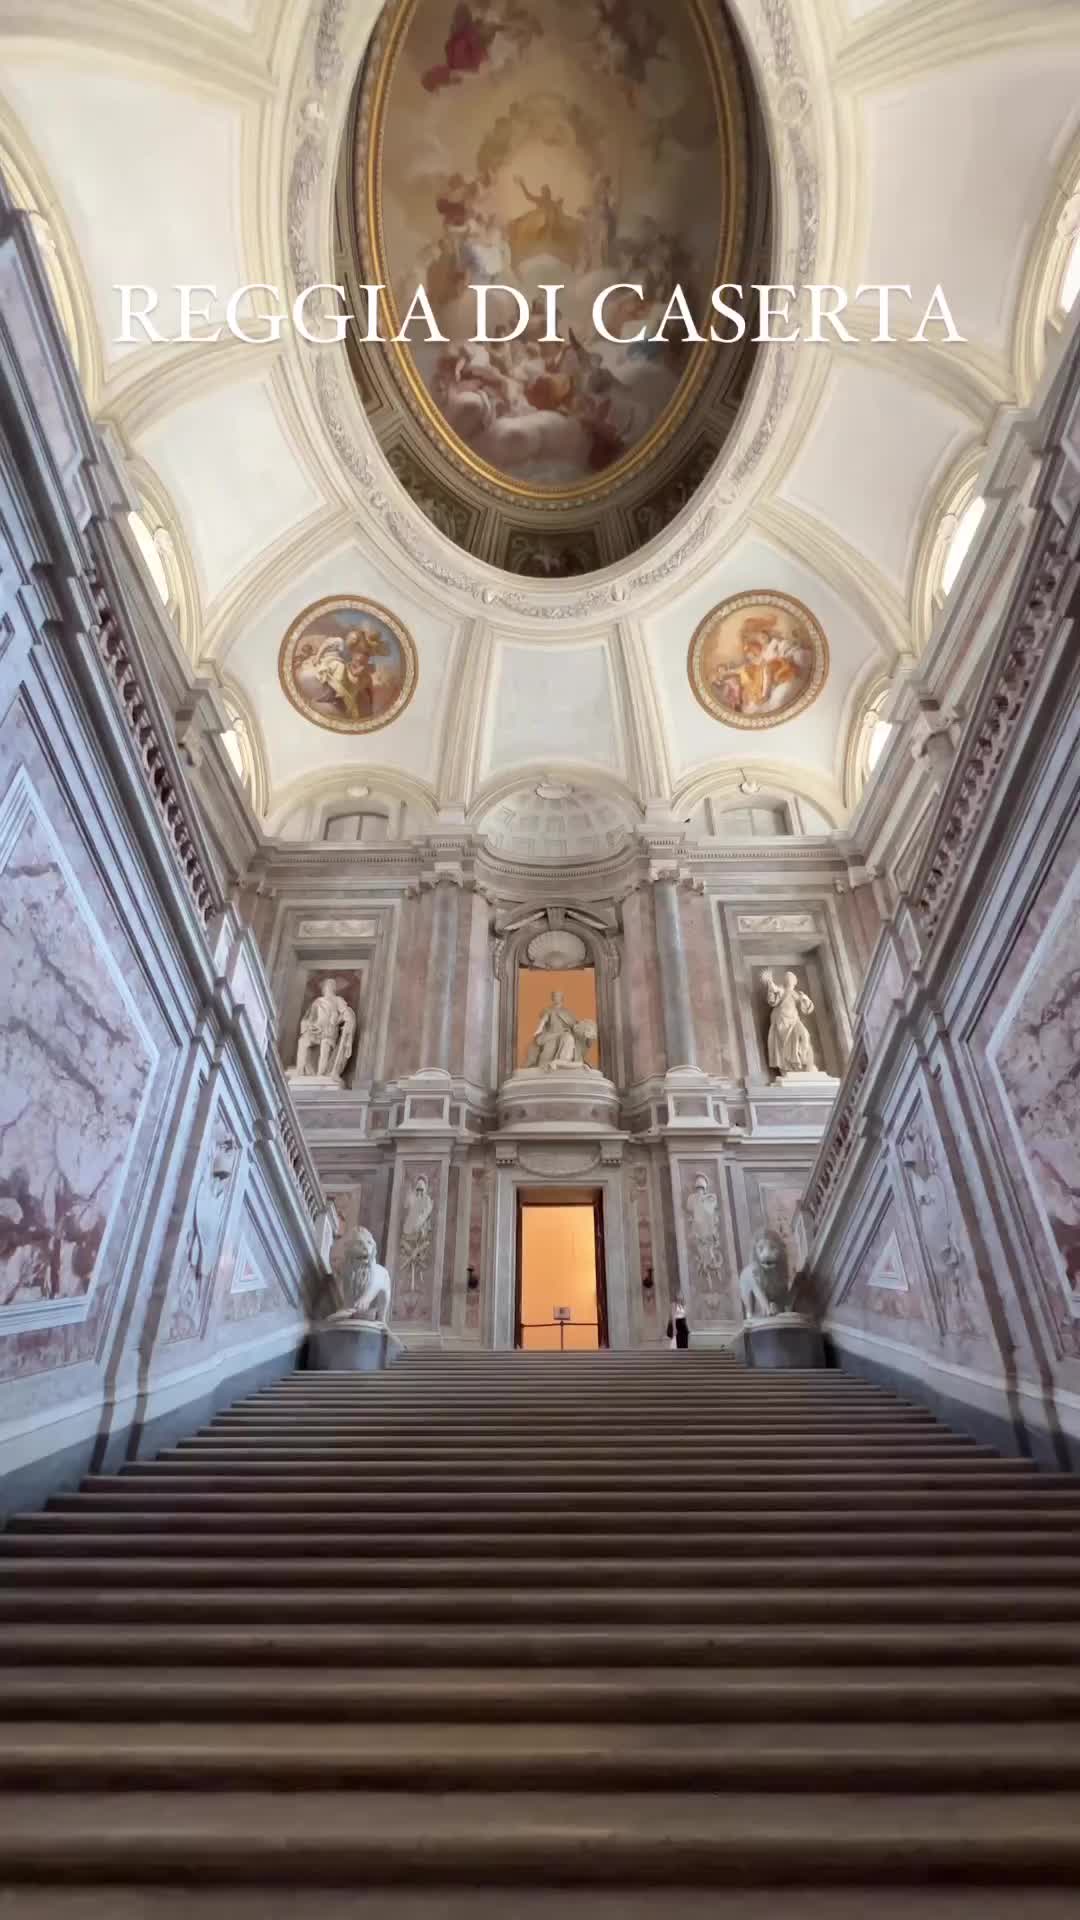 Discover the Royal Palace of Caserta, Italy 🇮🇹